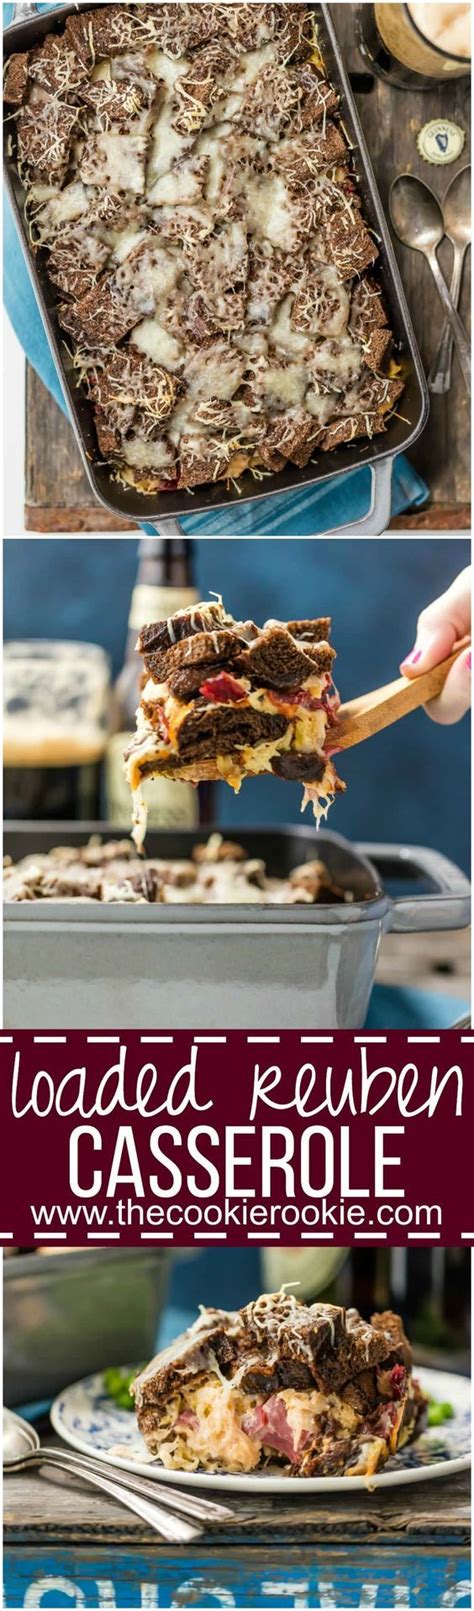 Simply place the sauerkraut and beef brisket in your slow cooker (along with any included spices) and set on low heat for 9 to 11 once it's done, build a delicious sandwich with swiss cheese, thousand island dressing and toasted pumpernickel rye bread. We LOVE this Loaded Reuben Casserole every St. Patrick's Day! Such an easy comfort food recipe ...